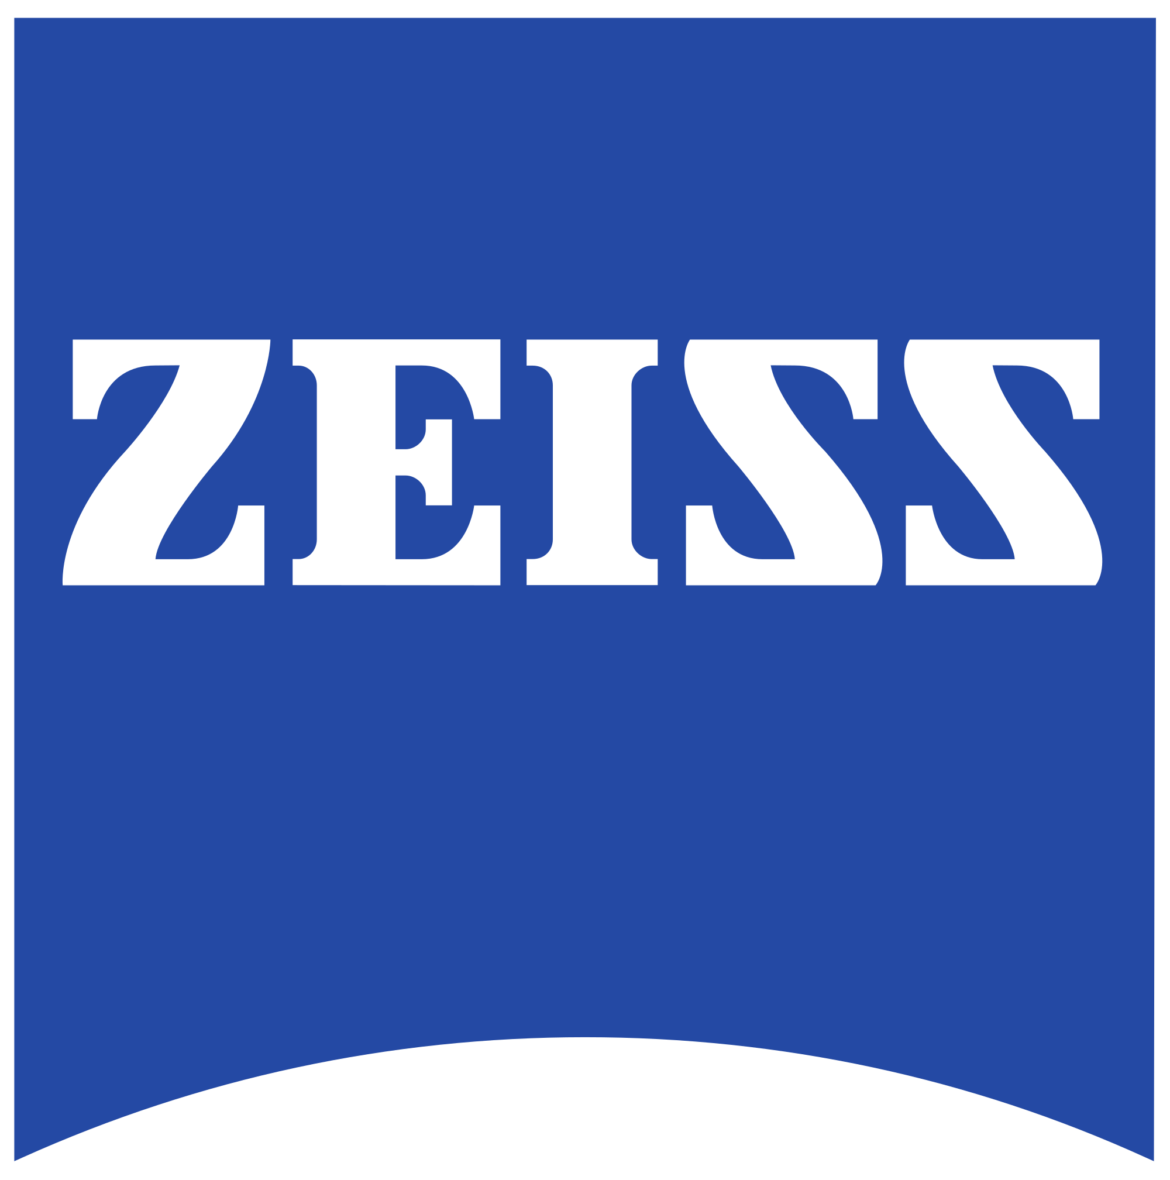 2000px-Zeiss_logo.svg_.png